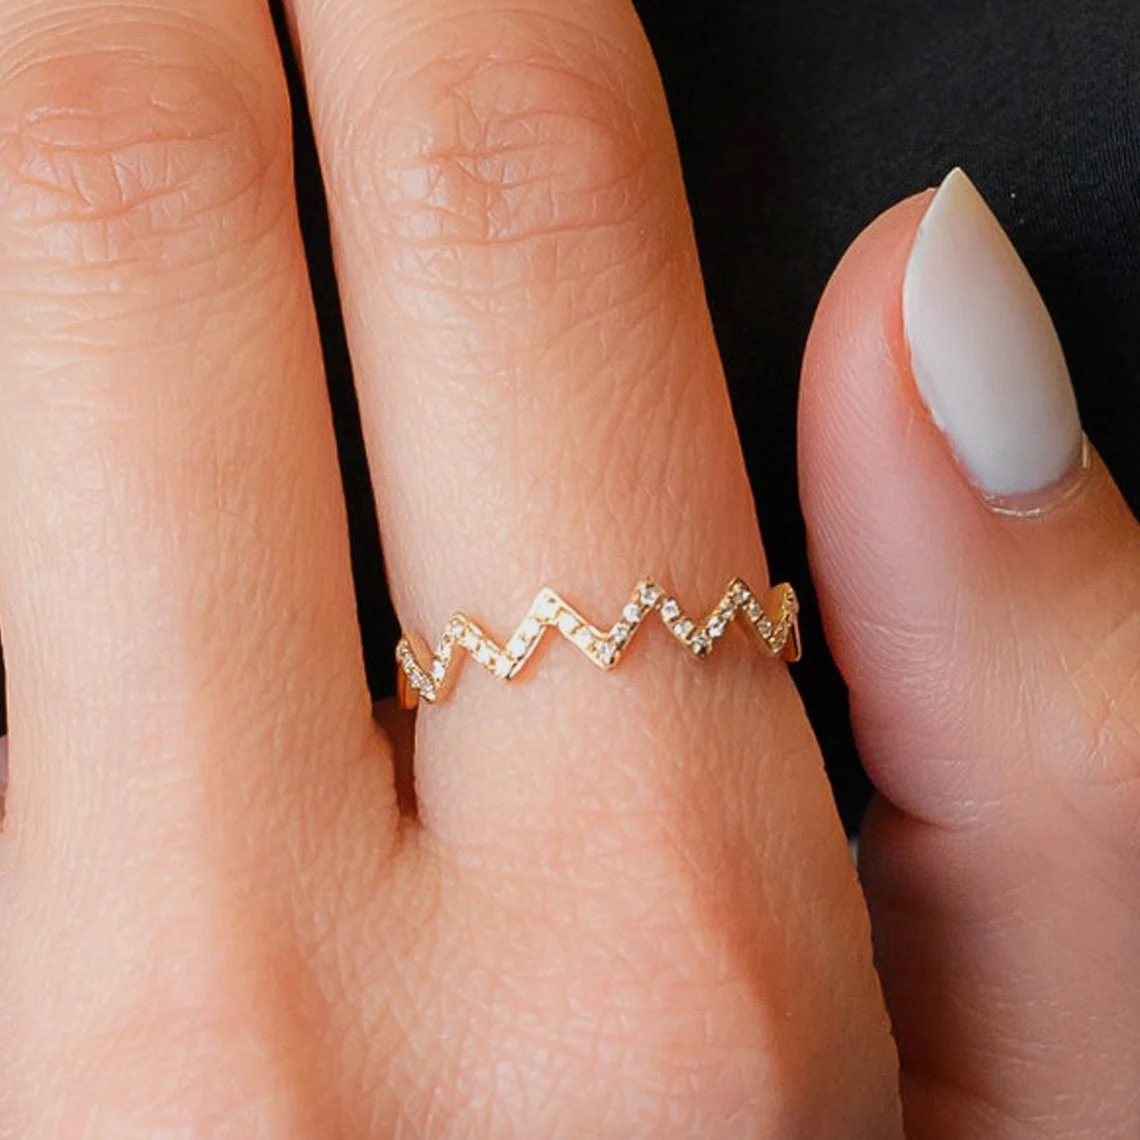 Rose or Yellow Solid Gold Handmade Thin Minimalist Affordable Modern Jewelry in 14k/18k White Unique Diamond ring 0.12 ct Diamond Zigzag Baguette Engagement Ring or Wedding Band for Women 4-14US 